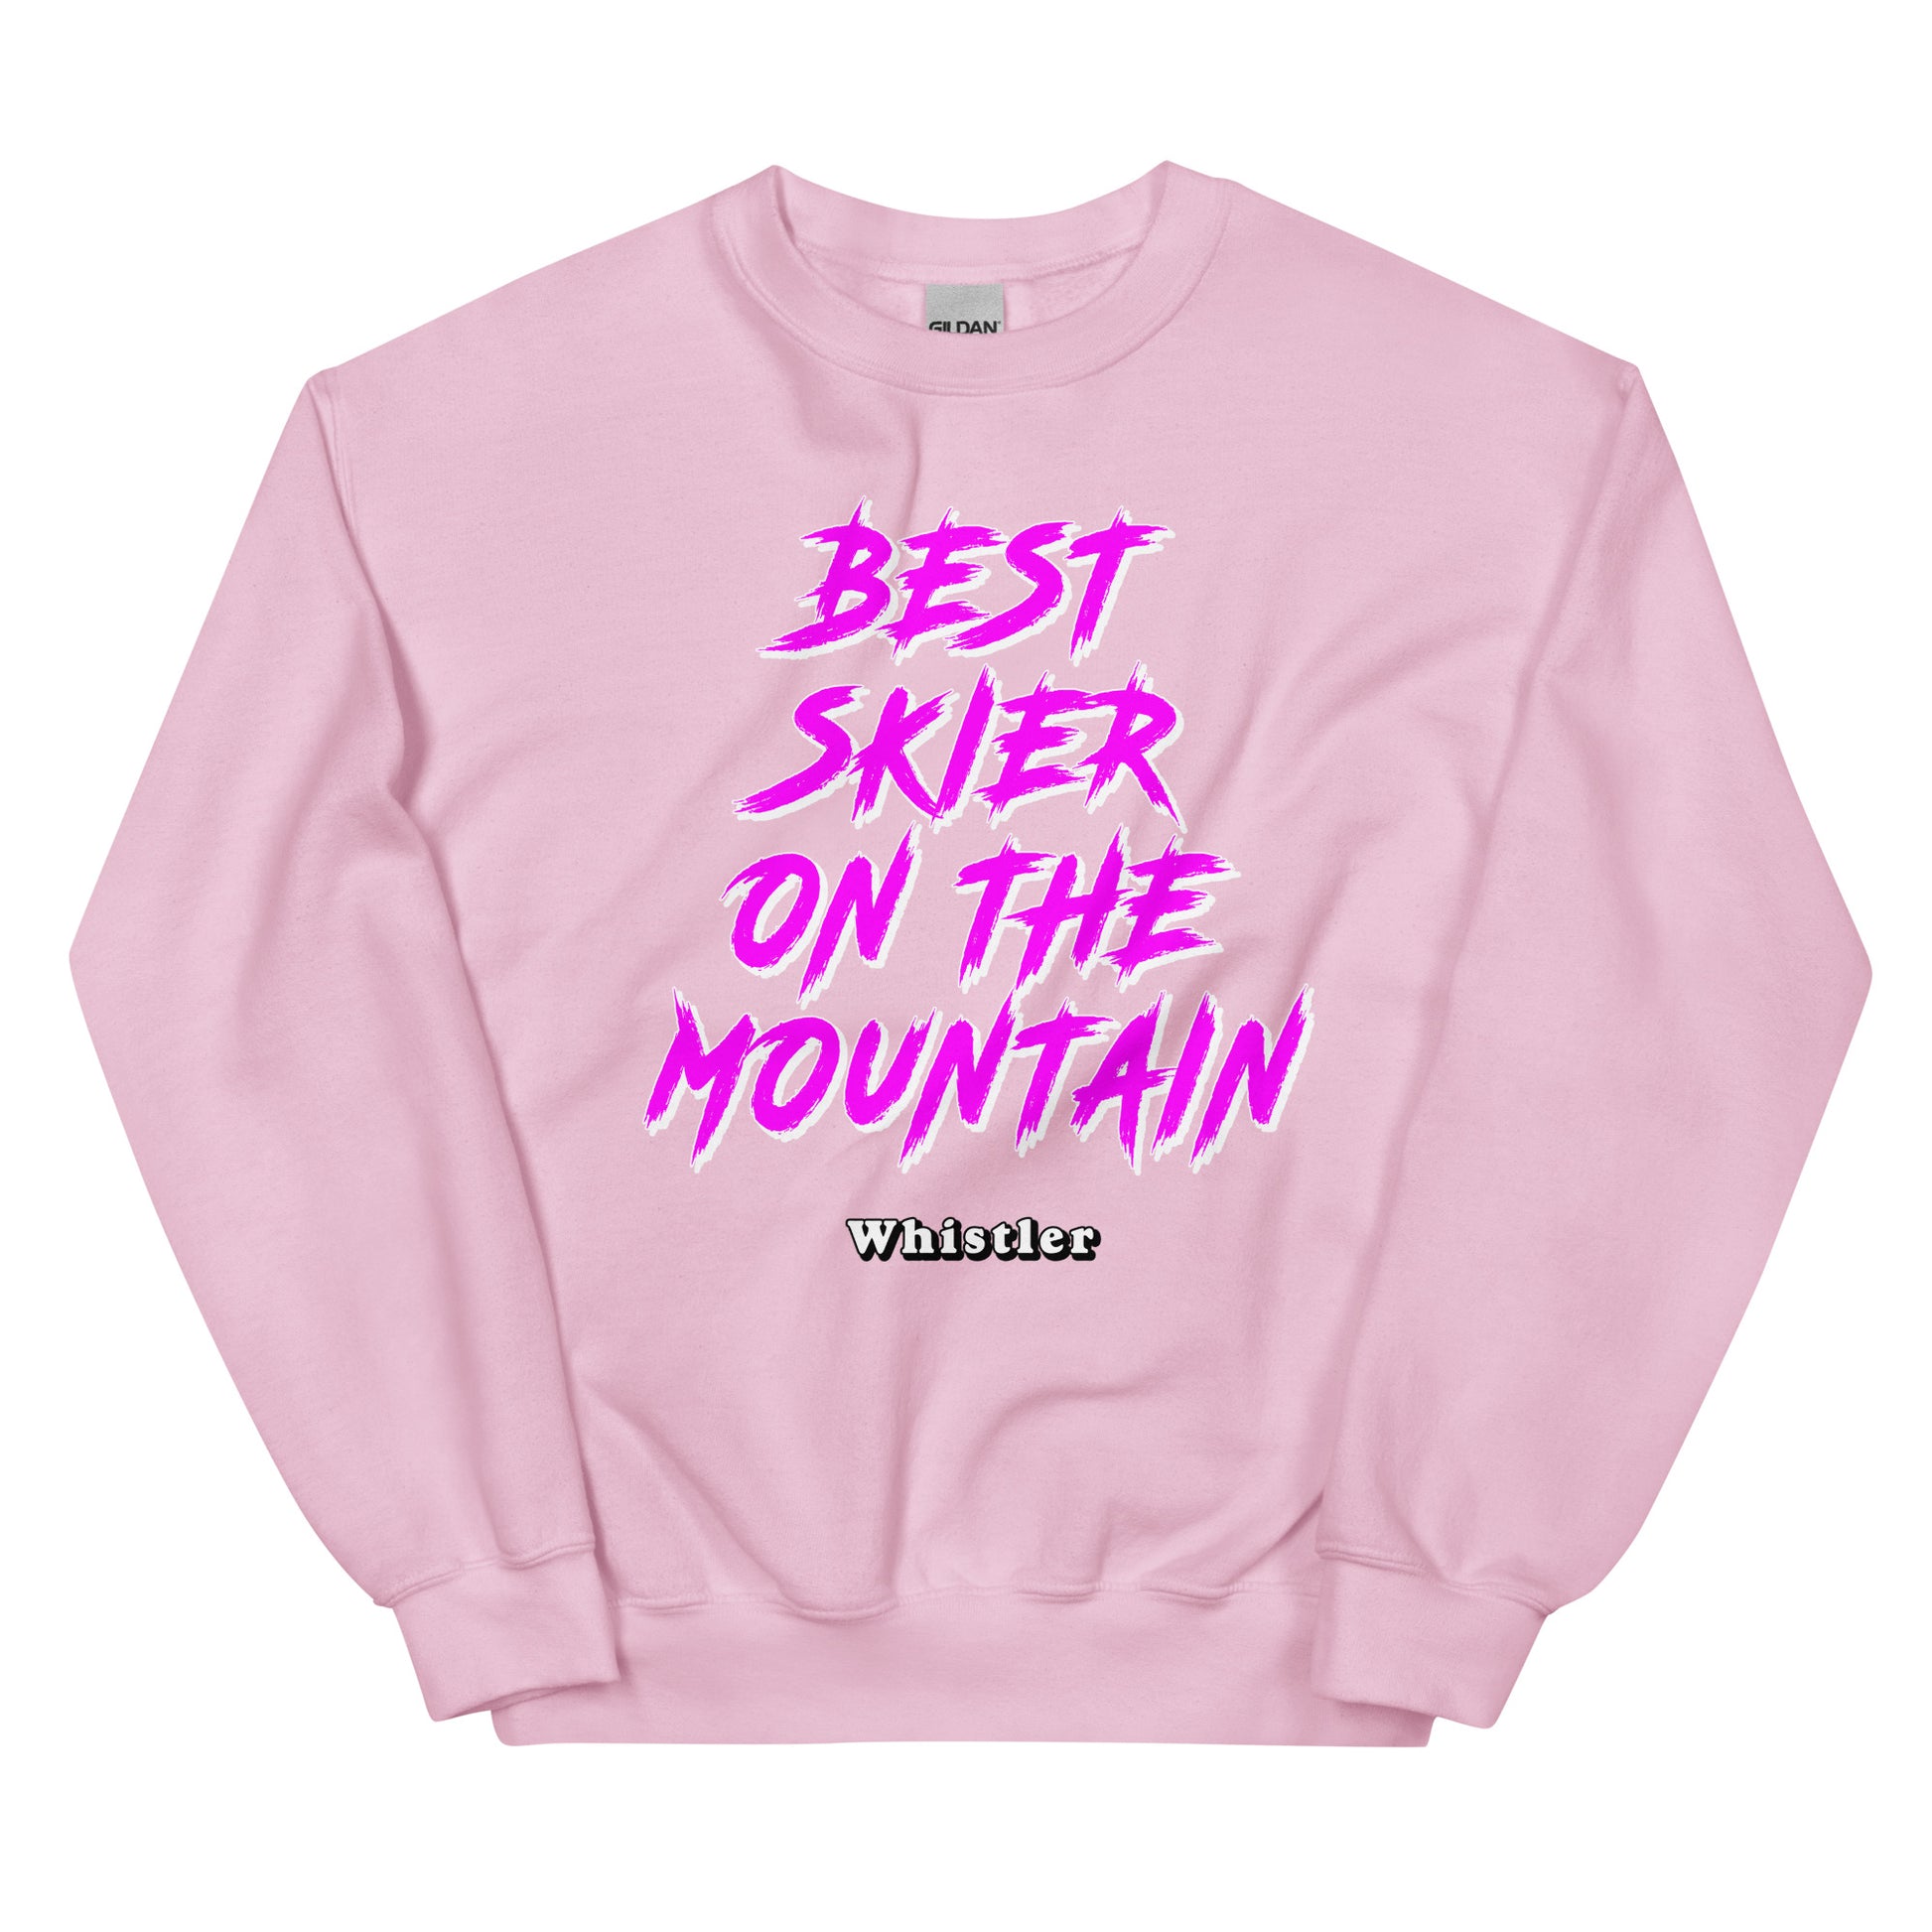 best skiier on the mountain whistler design printed on a crewneck sweatshirt by Whistler Shirtsbest skiier on the mountain whistler design printed on a crewneck sweatshirt by Whistler Shirts